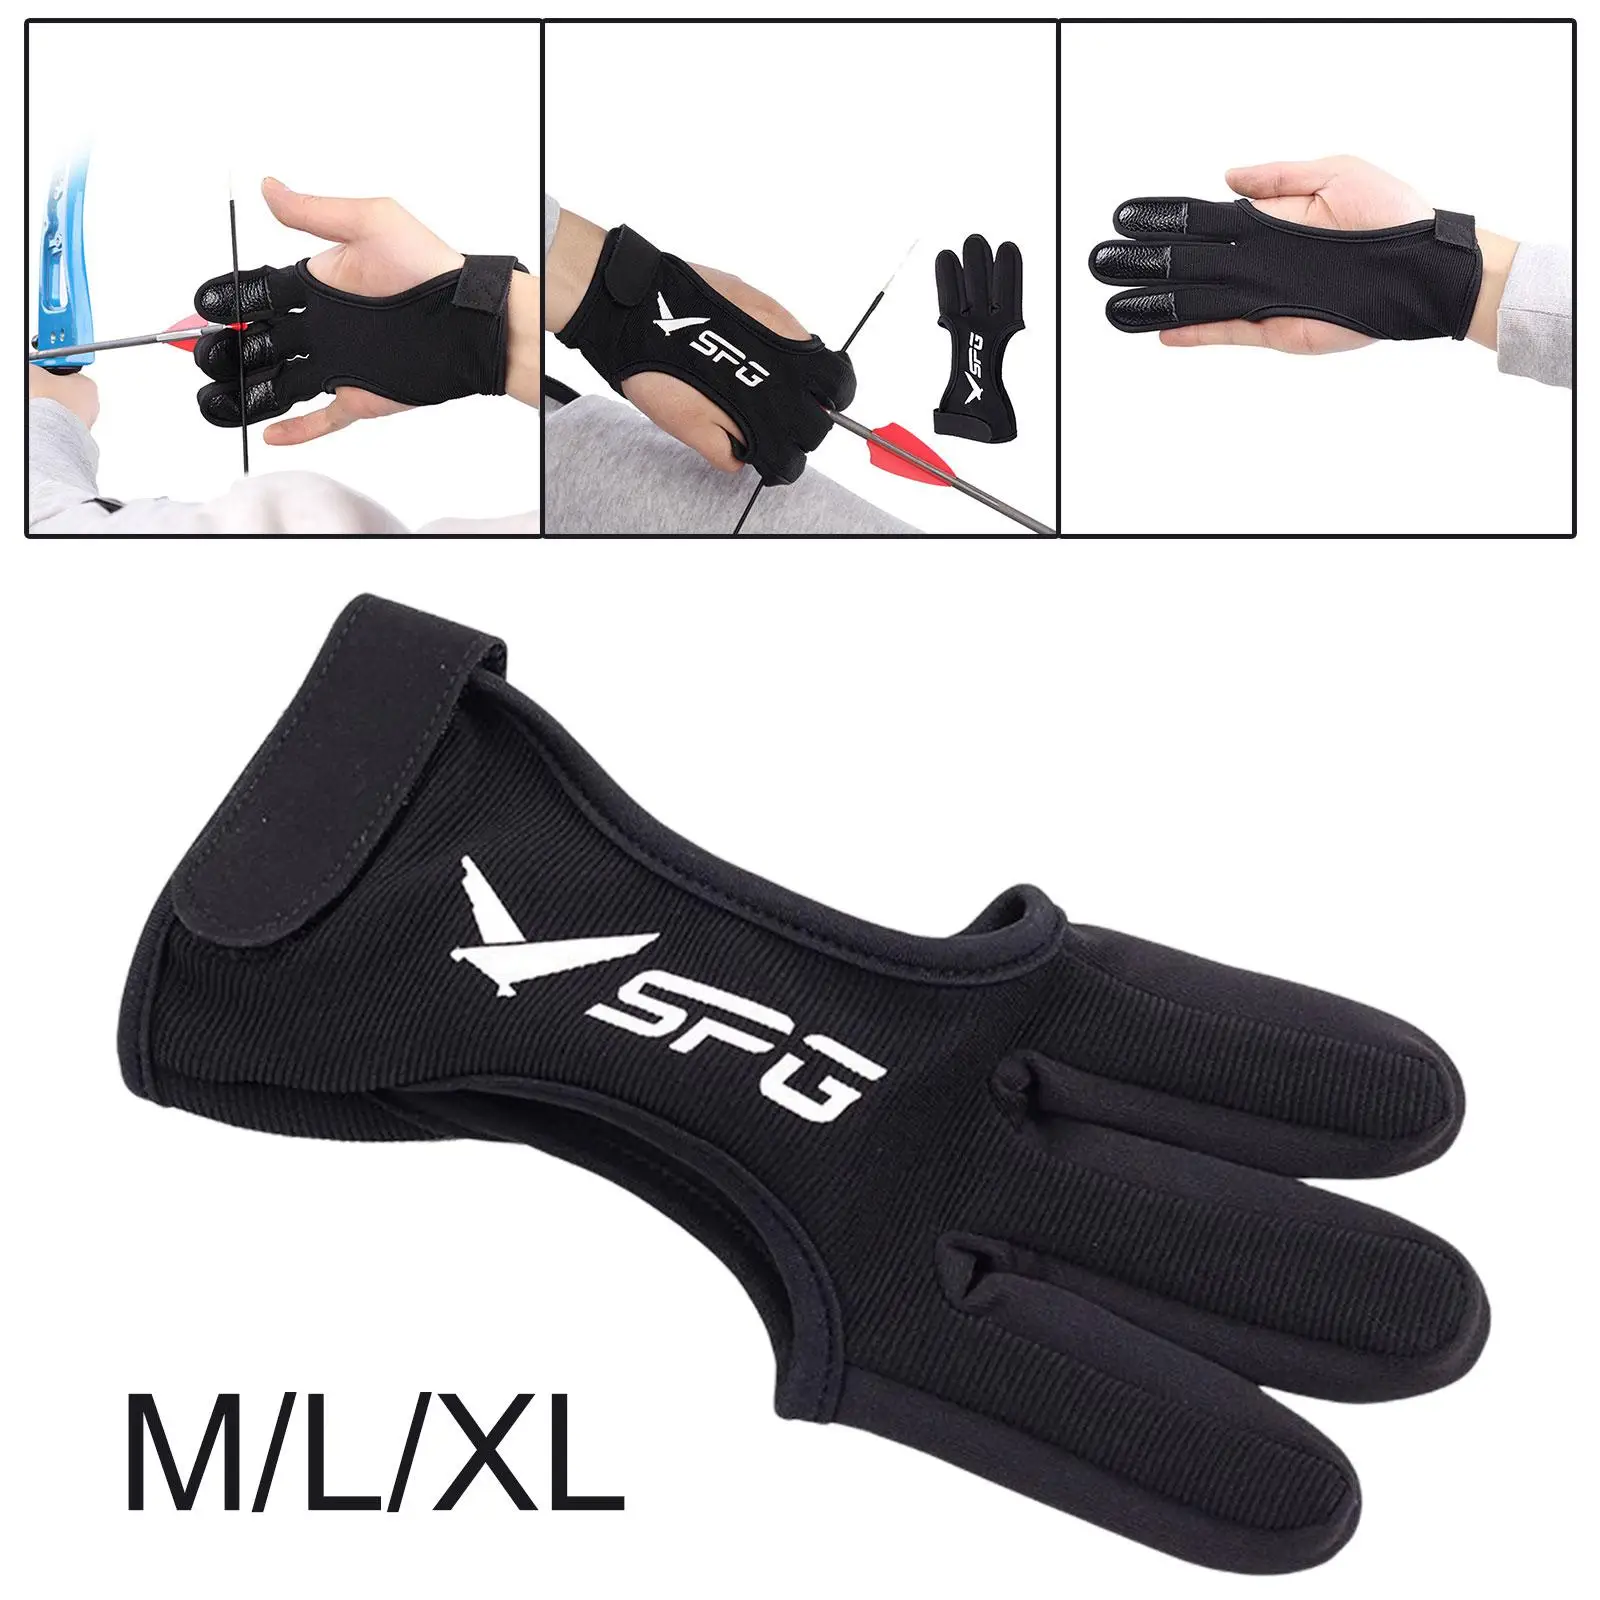 Durable Archery Glove 3 Fingers Guard Training Aids Hunting Glove fot Youth